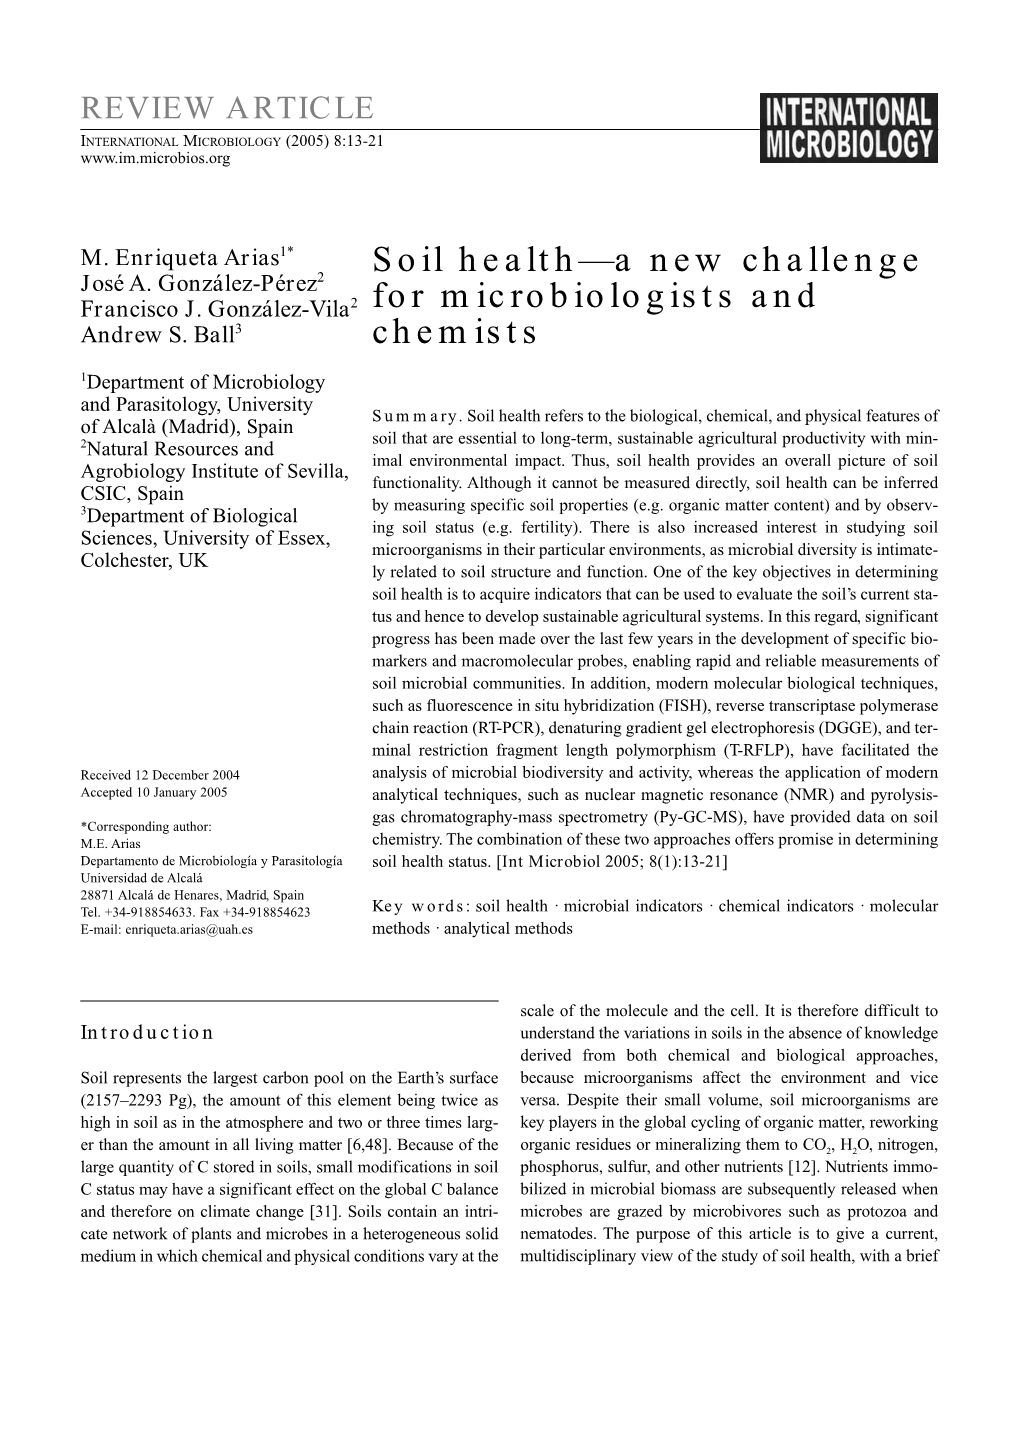 Soil Health—A New Challenge for Microbiologists and Chemists